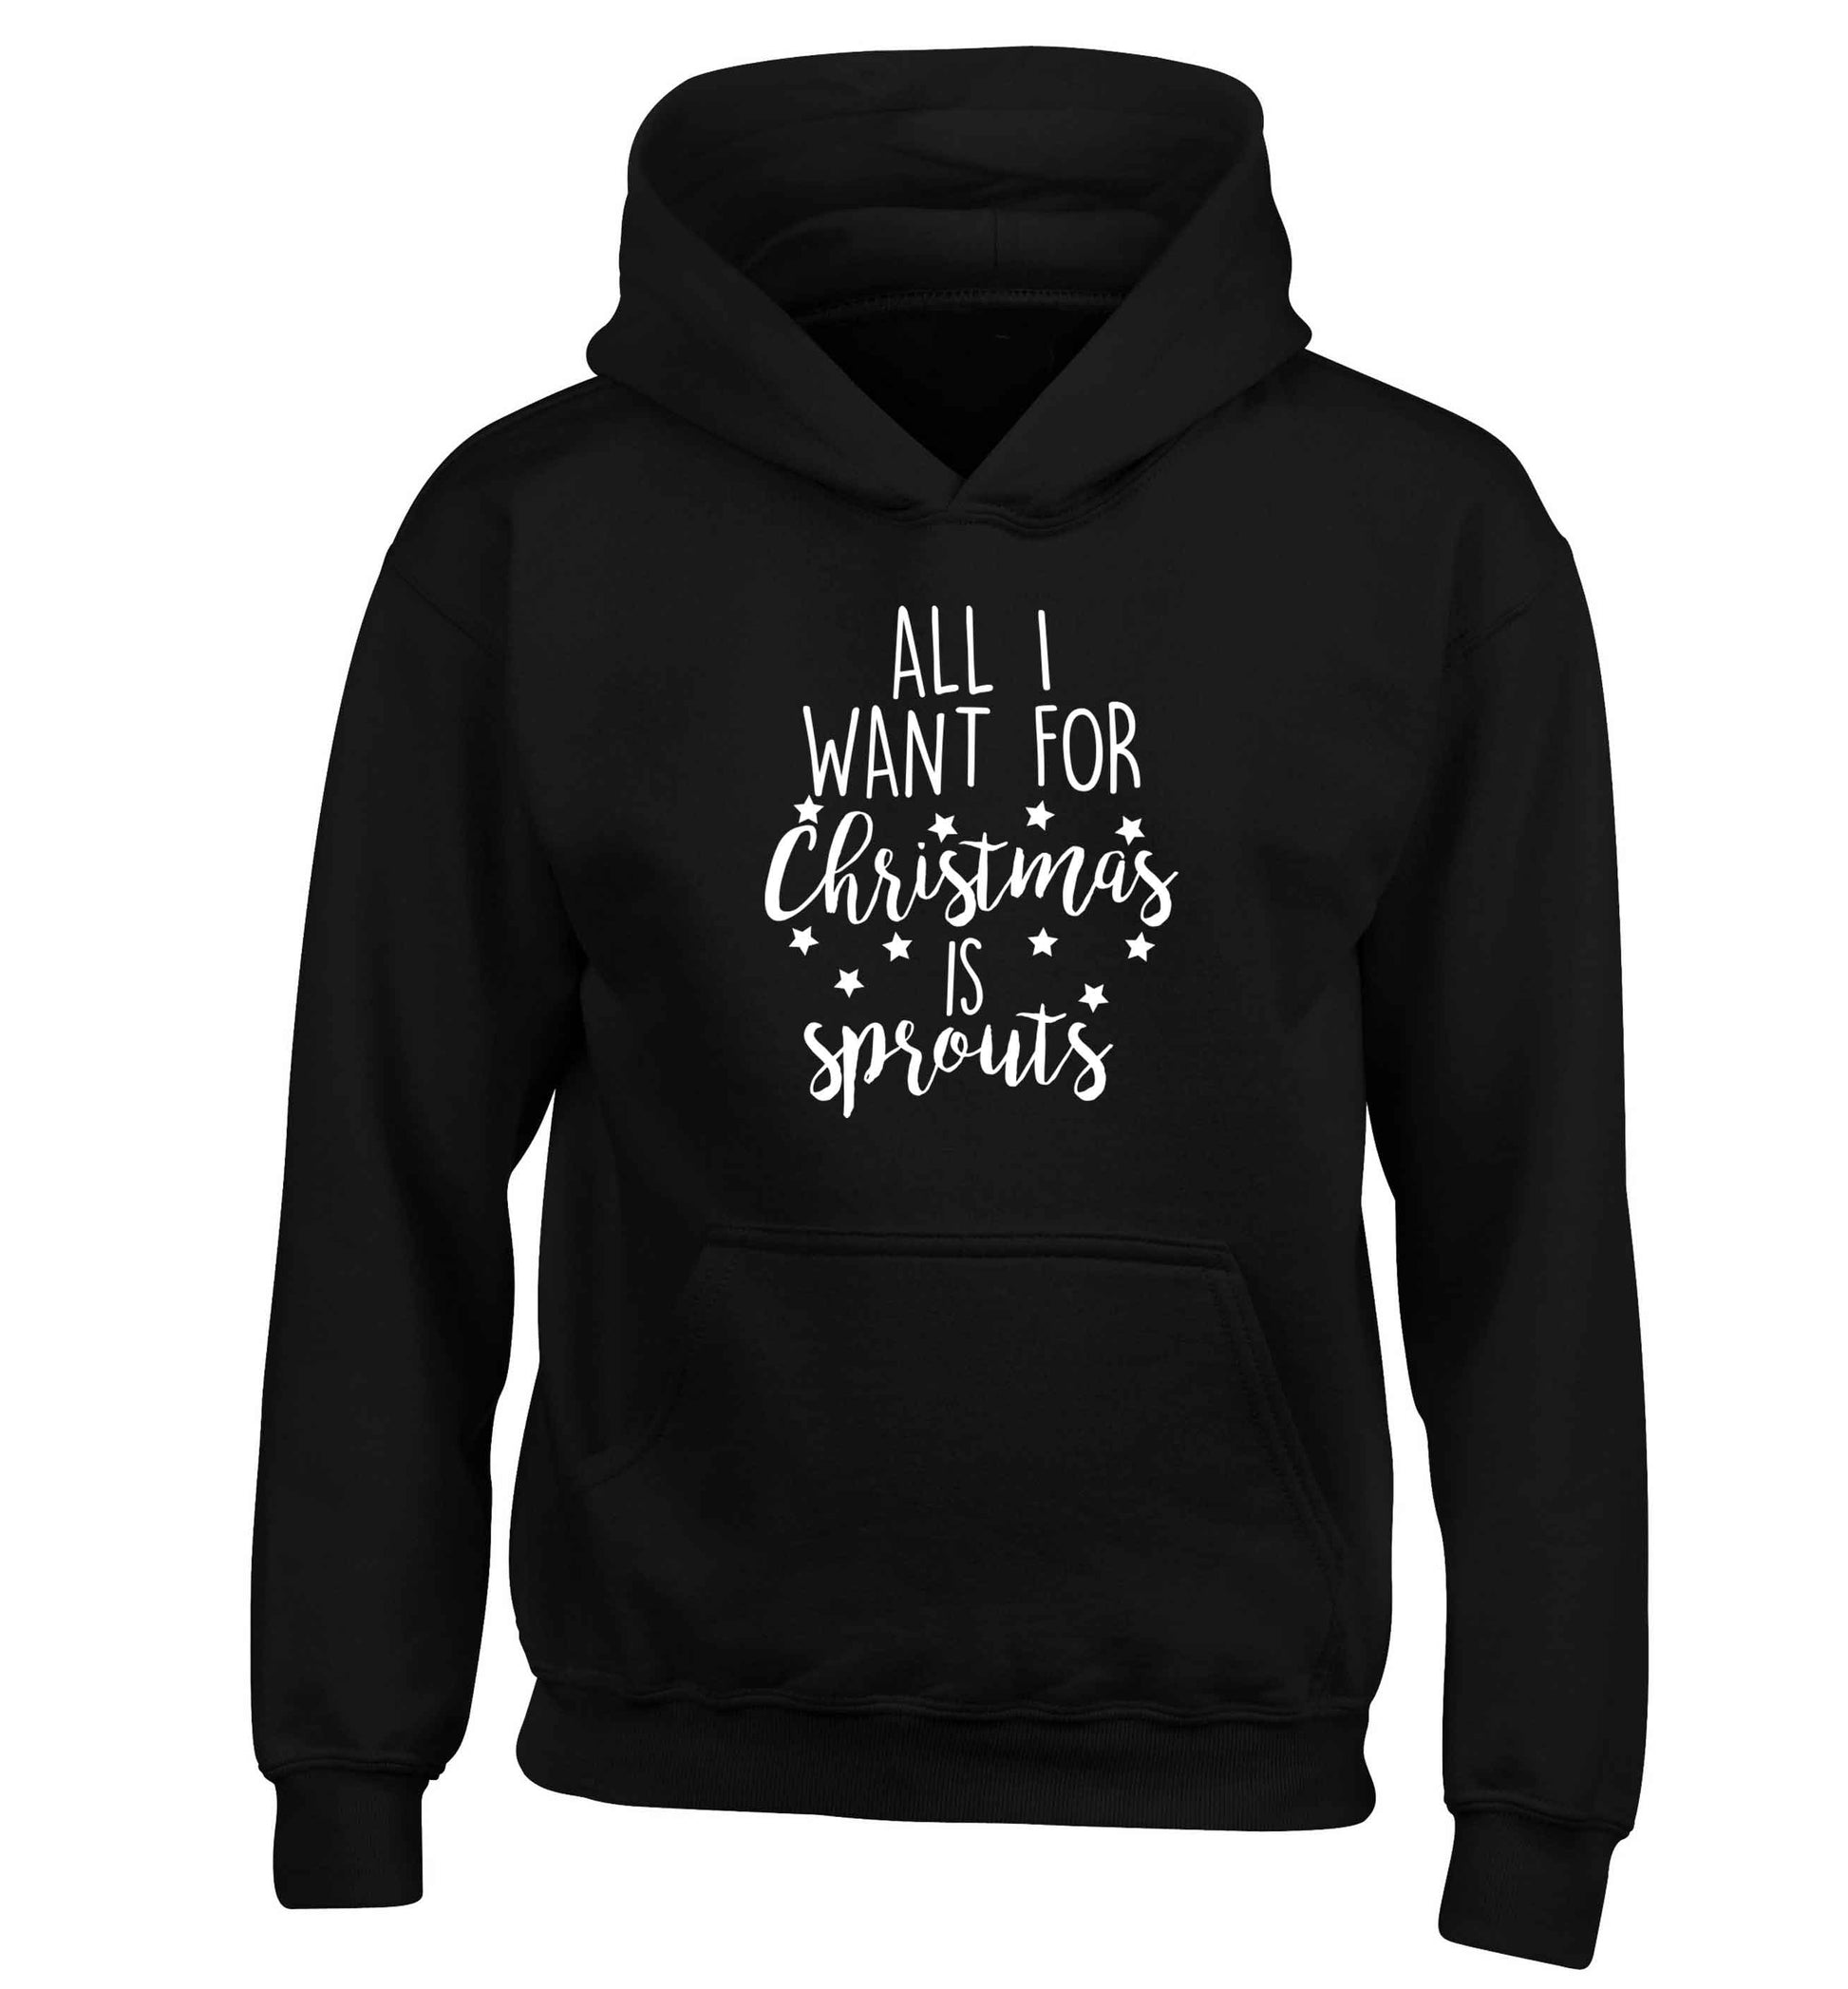 All I want for Christmas is sprouts children's black hoodie 12-13 Years